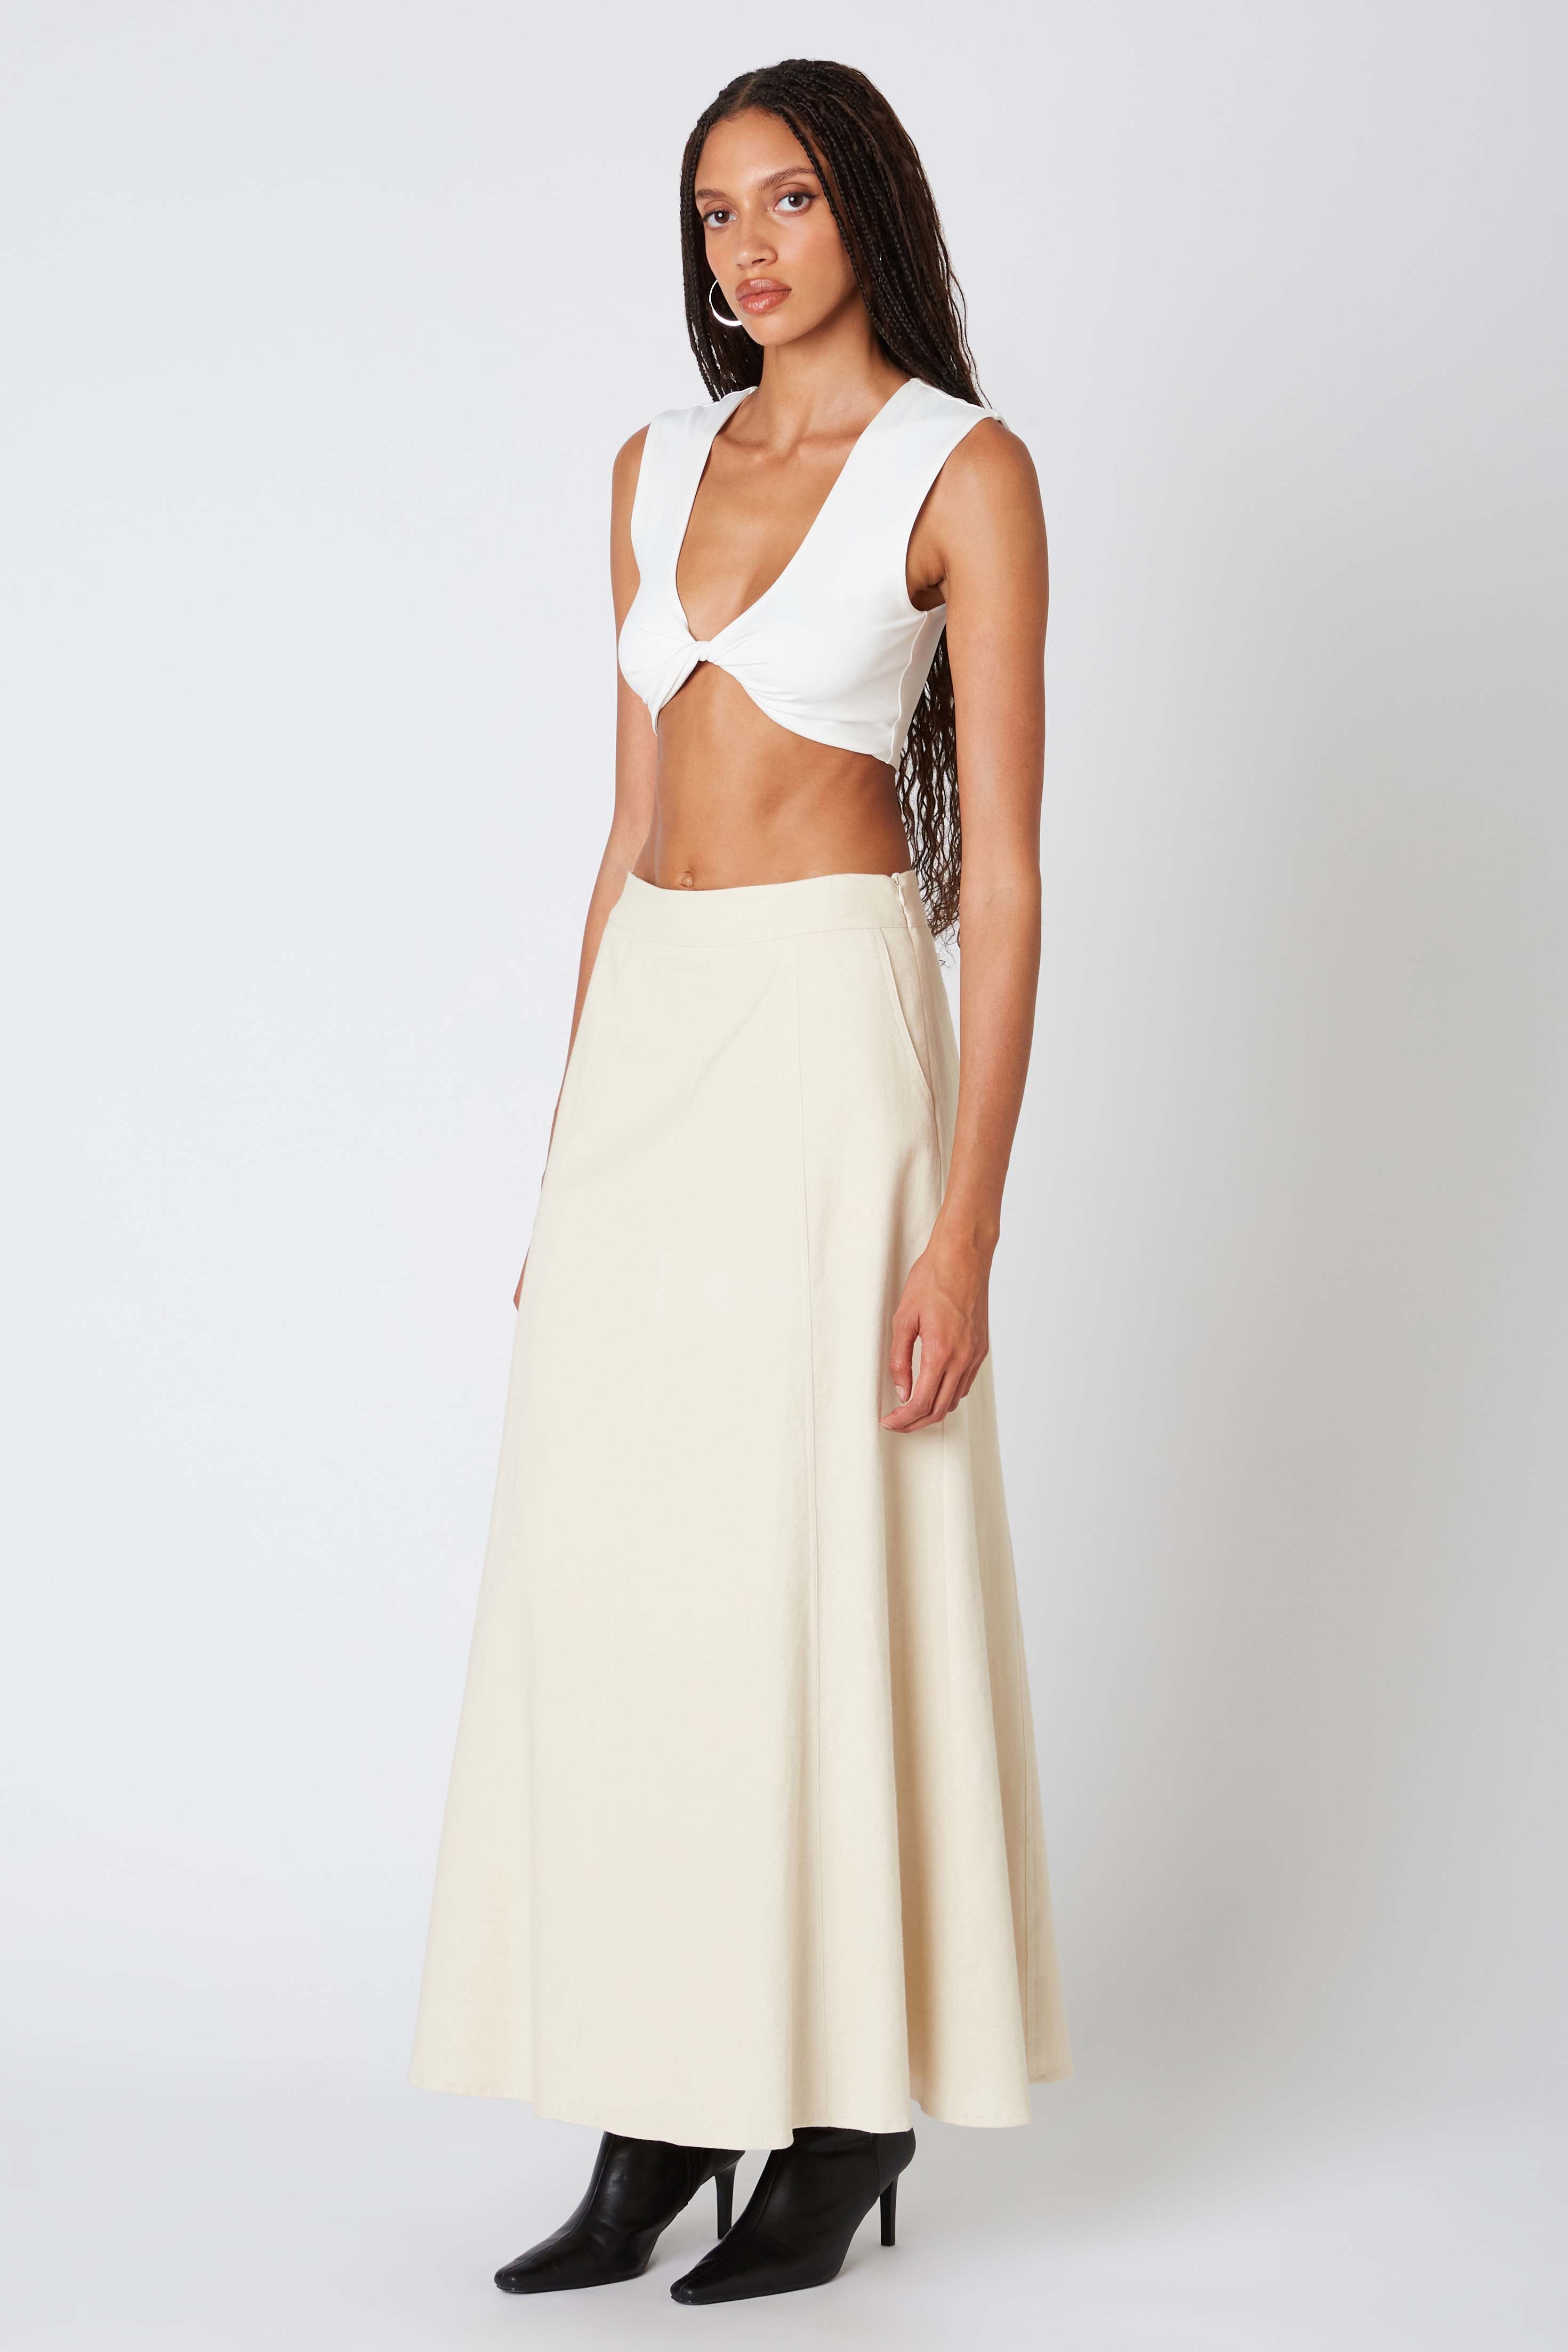 Twill Maxi Skirt in Stone Side View